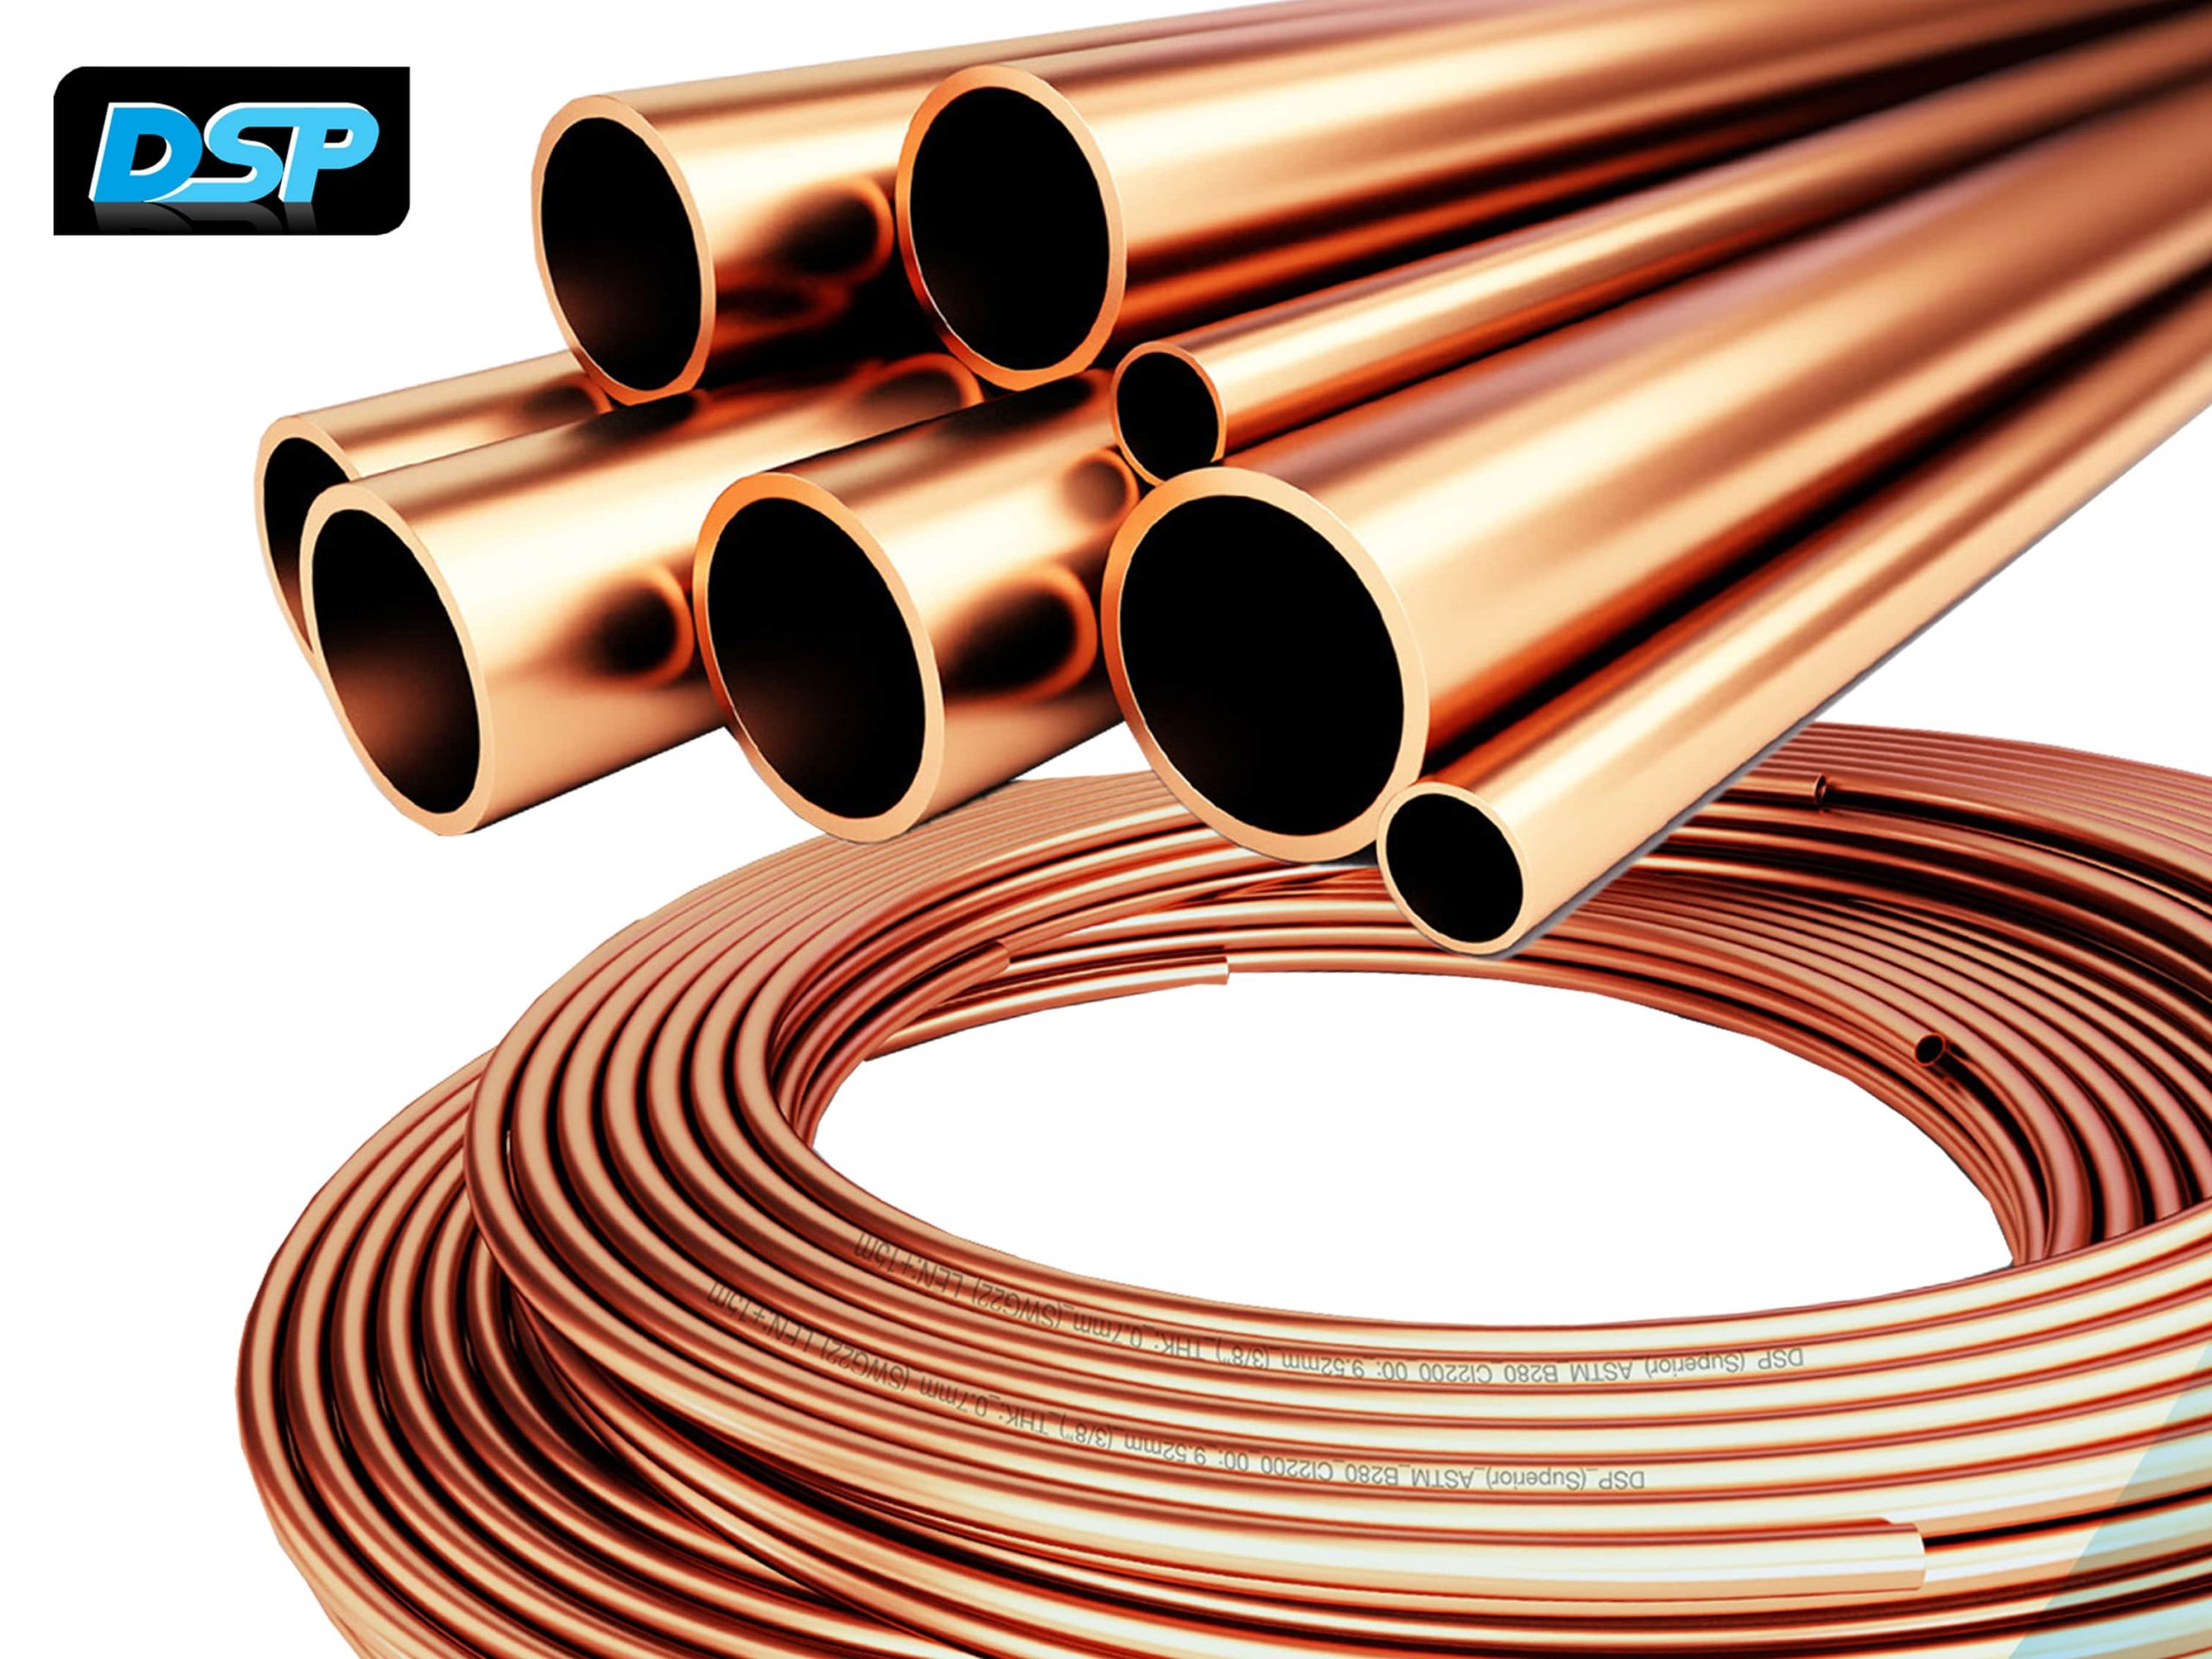 DSP Copper pipes